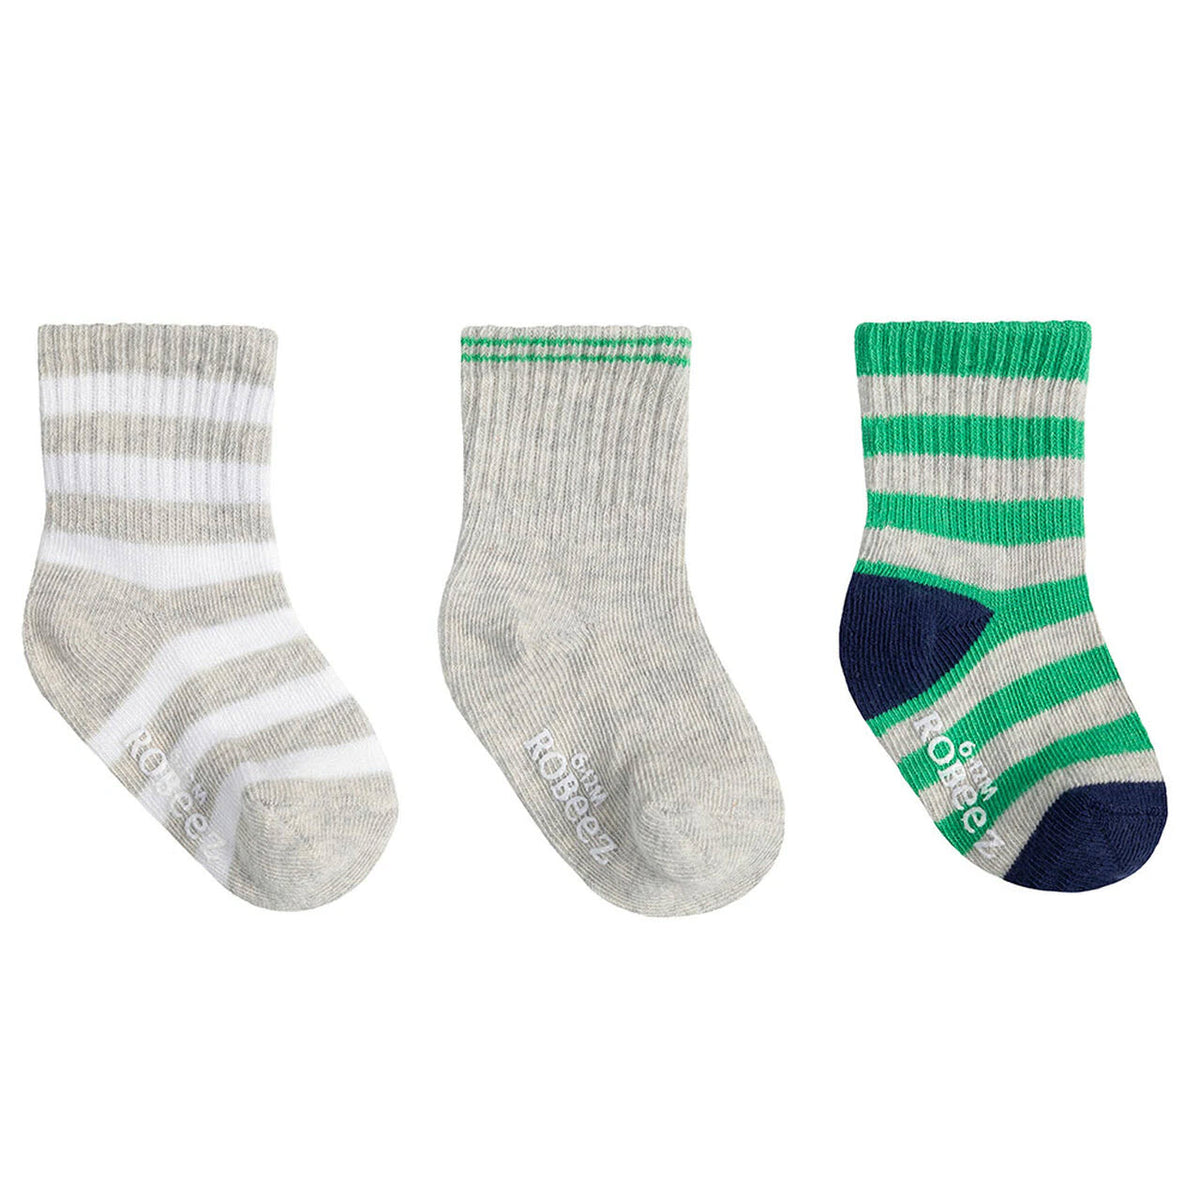 ROBEEZ DAILY DAVE 3 PACK SOCKS